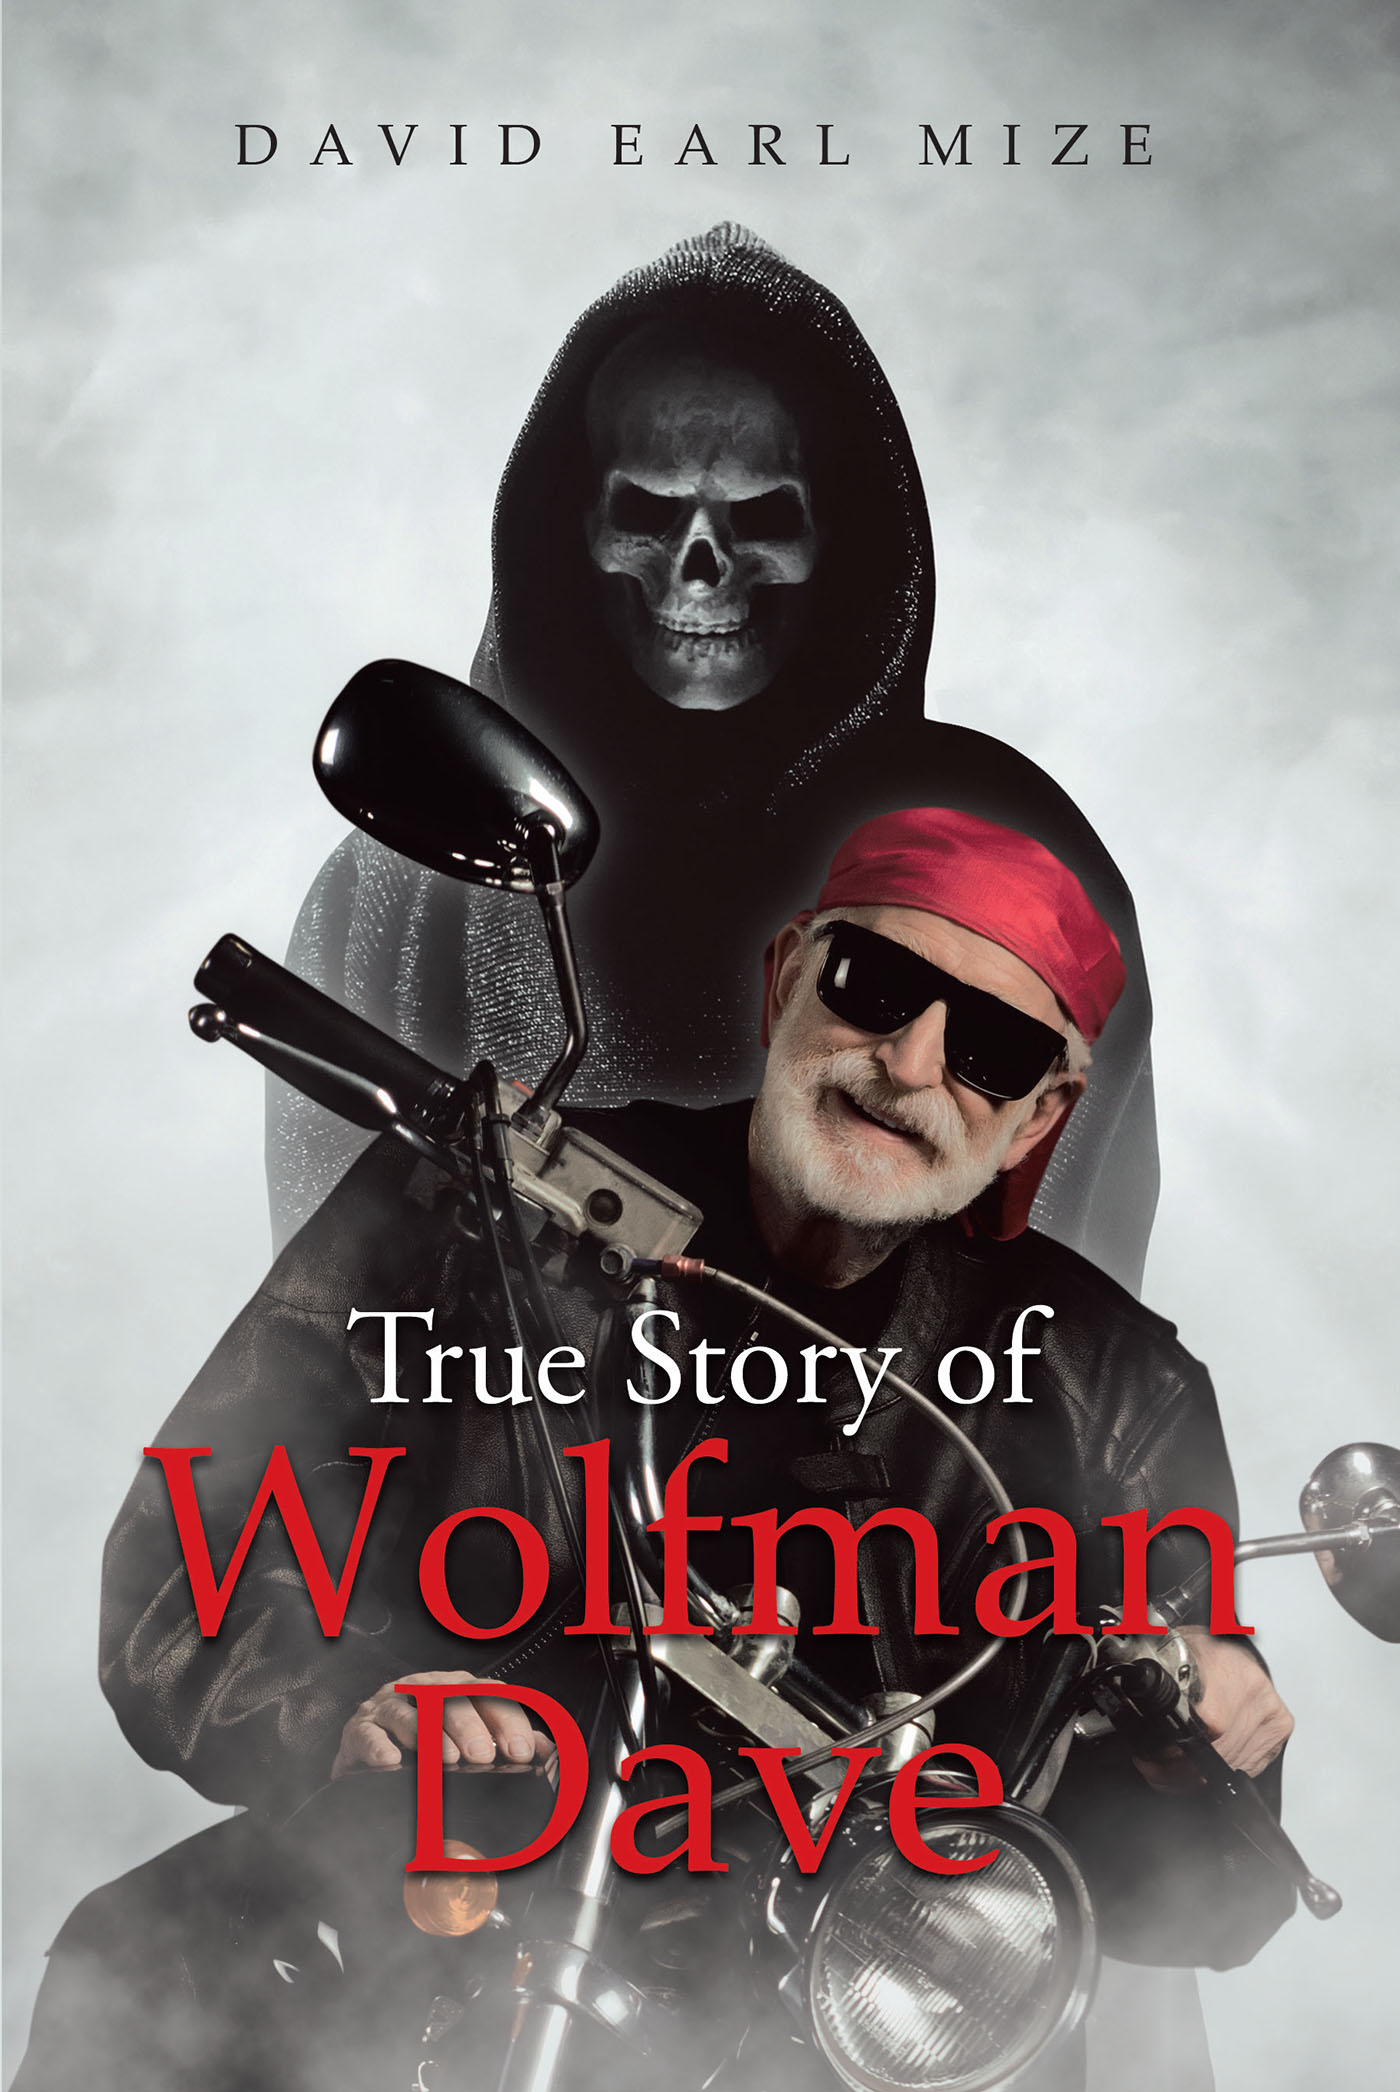 Author David Earl Mize’s New Book, "The True Story of Wolfman Dave," is a Captivating and Engaging Memoir Filled with Drama, Horror, and Thrilling Action